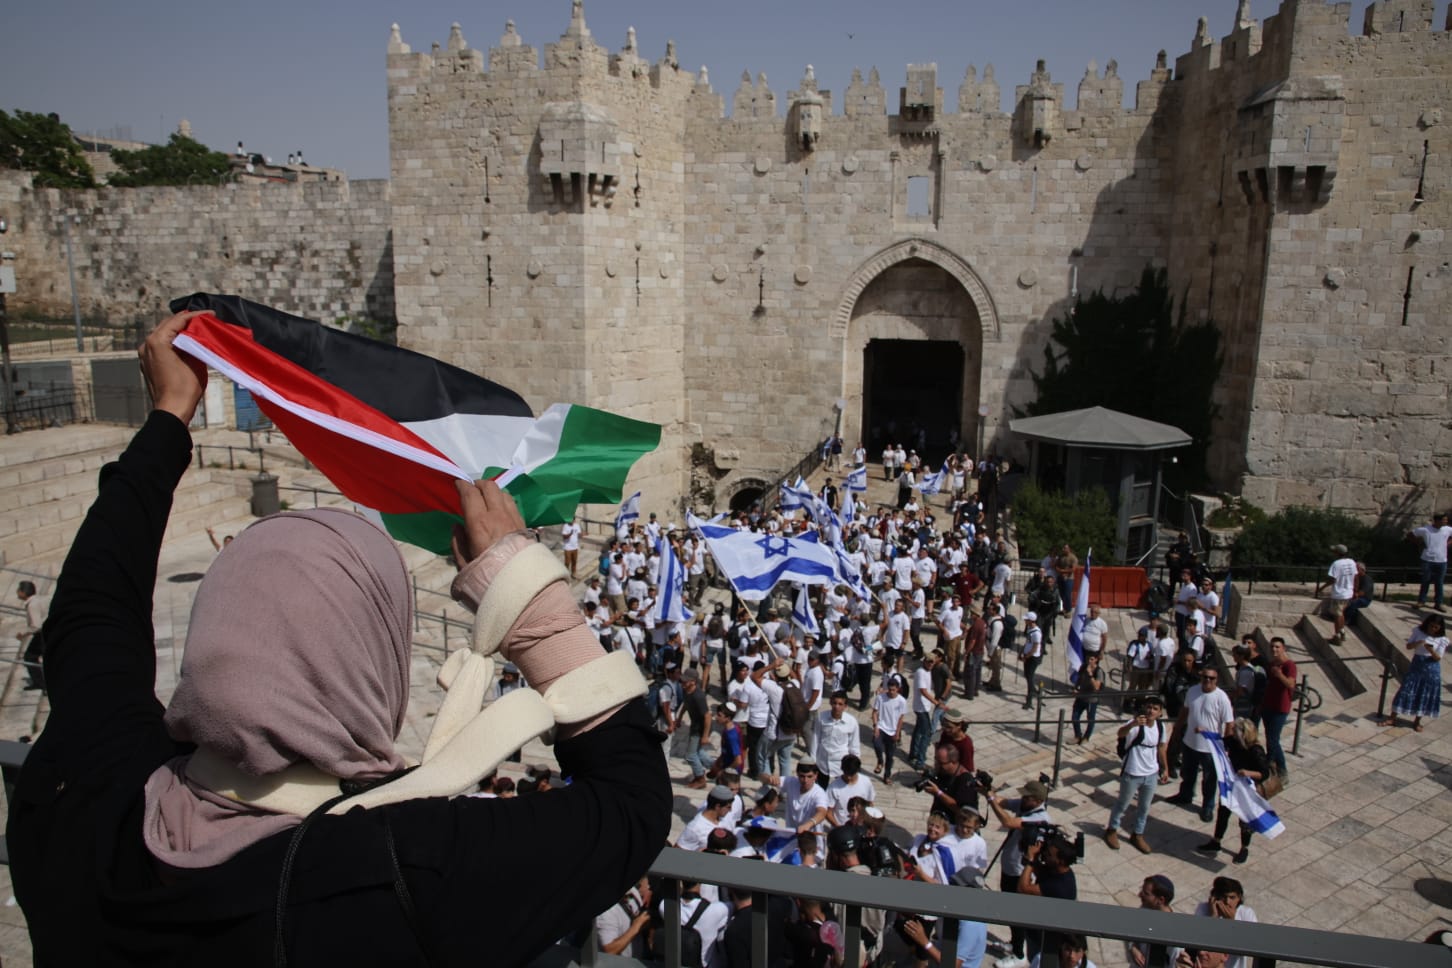 A Palestinian woman waves a flag in front of the Israeli Flag March on Jerusalem Day at Damascus Gate, Jerusalem, May 29, 2022. (Oren Ziv)